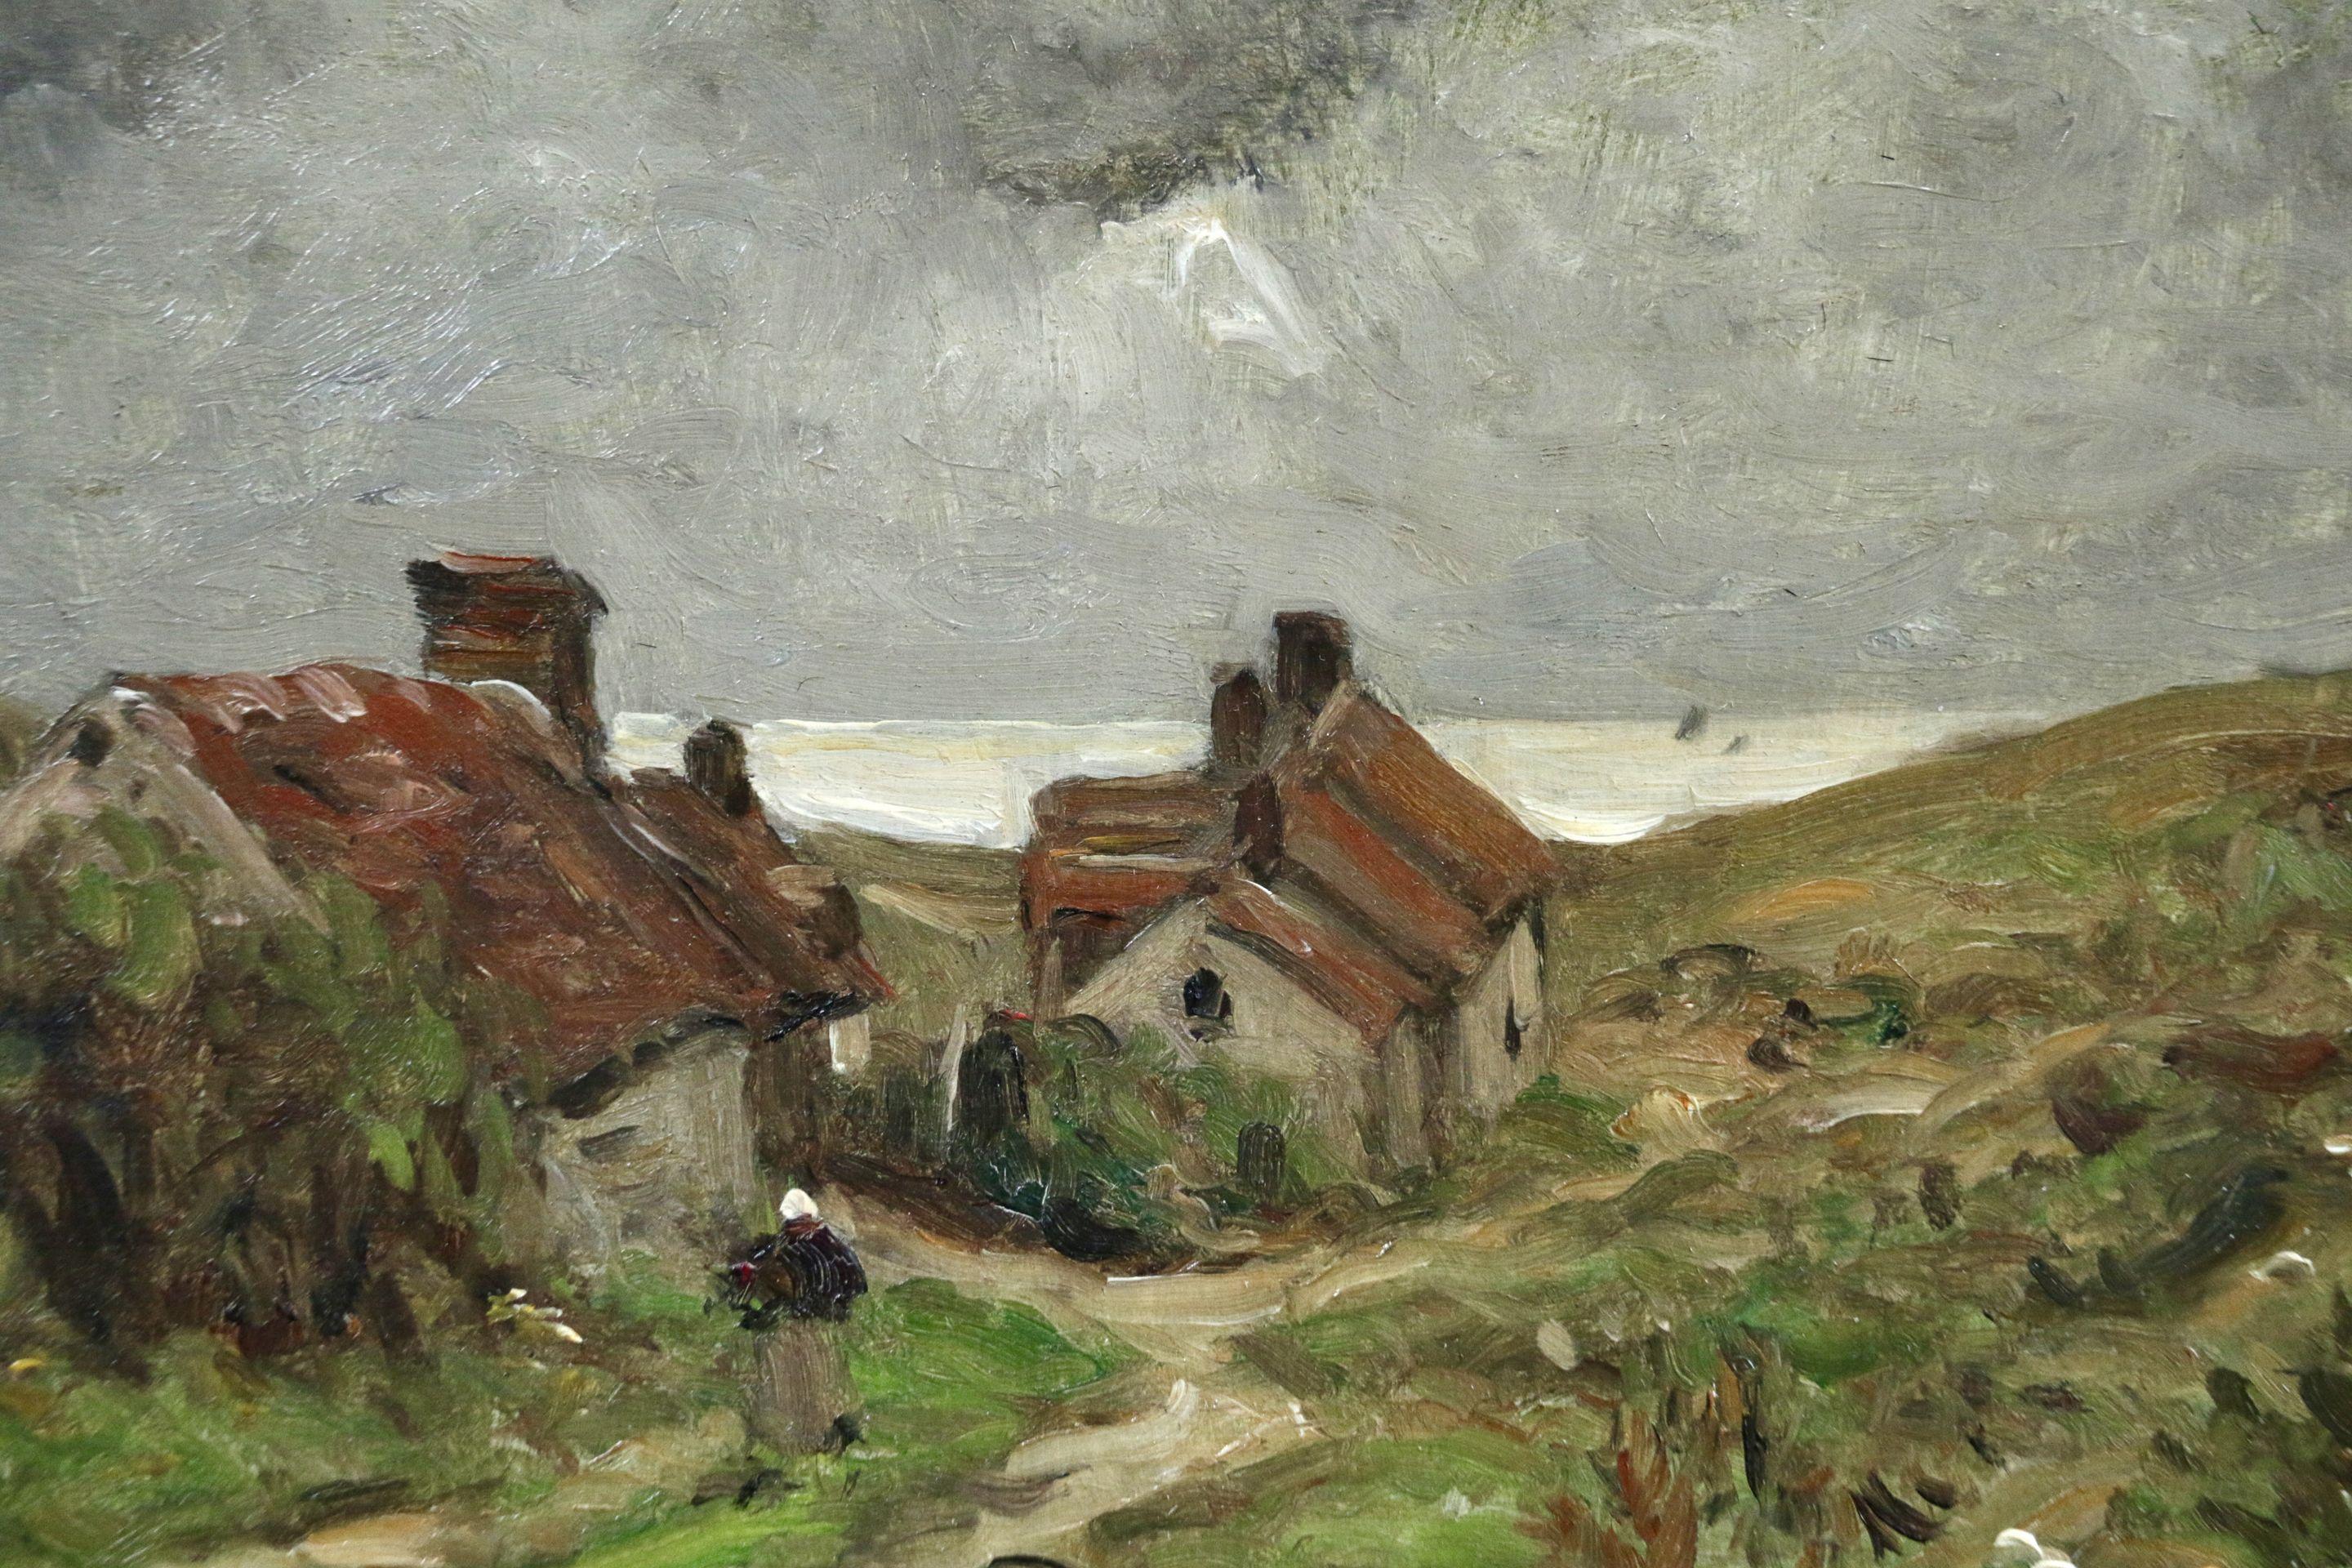 Cottages by the Sea -19th Century Oil, Figure & Houses in Landscape by Guillemet - Impressionist Painting by Jean-Baptiste-Antoine Guillemet